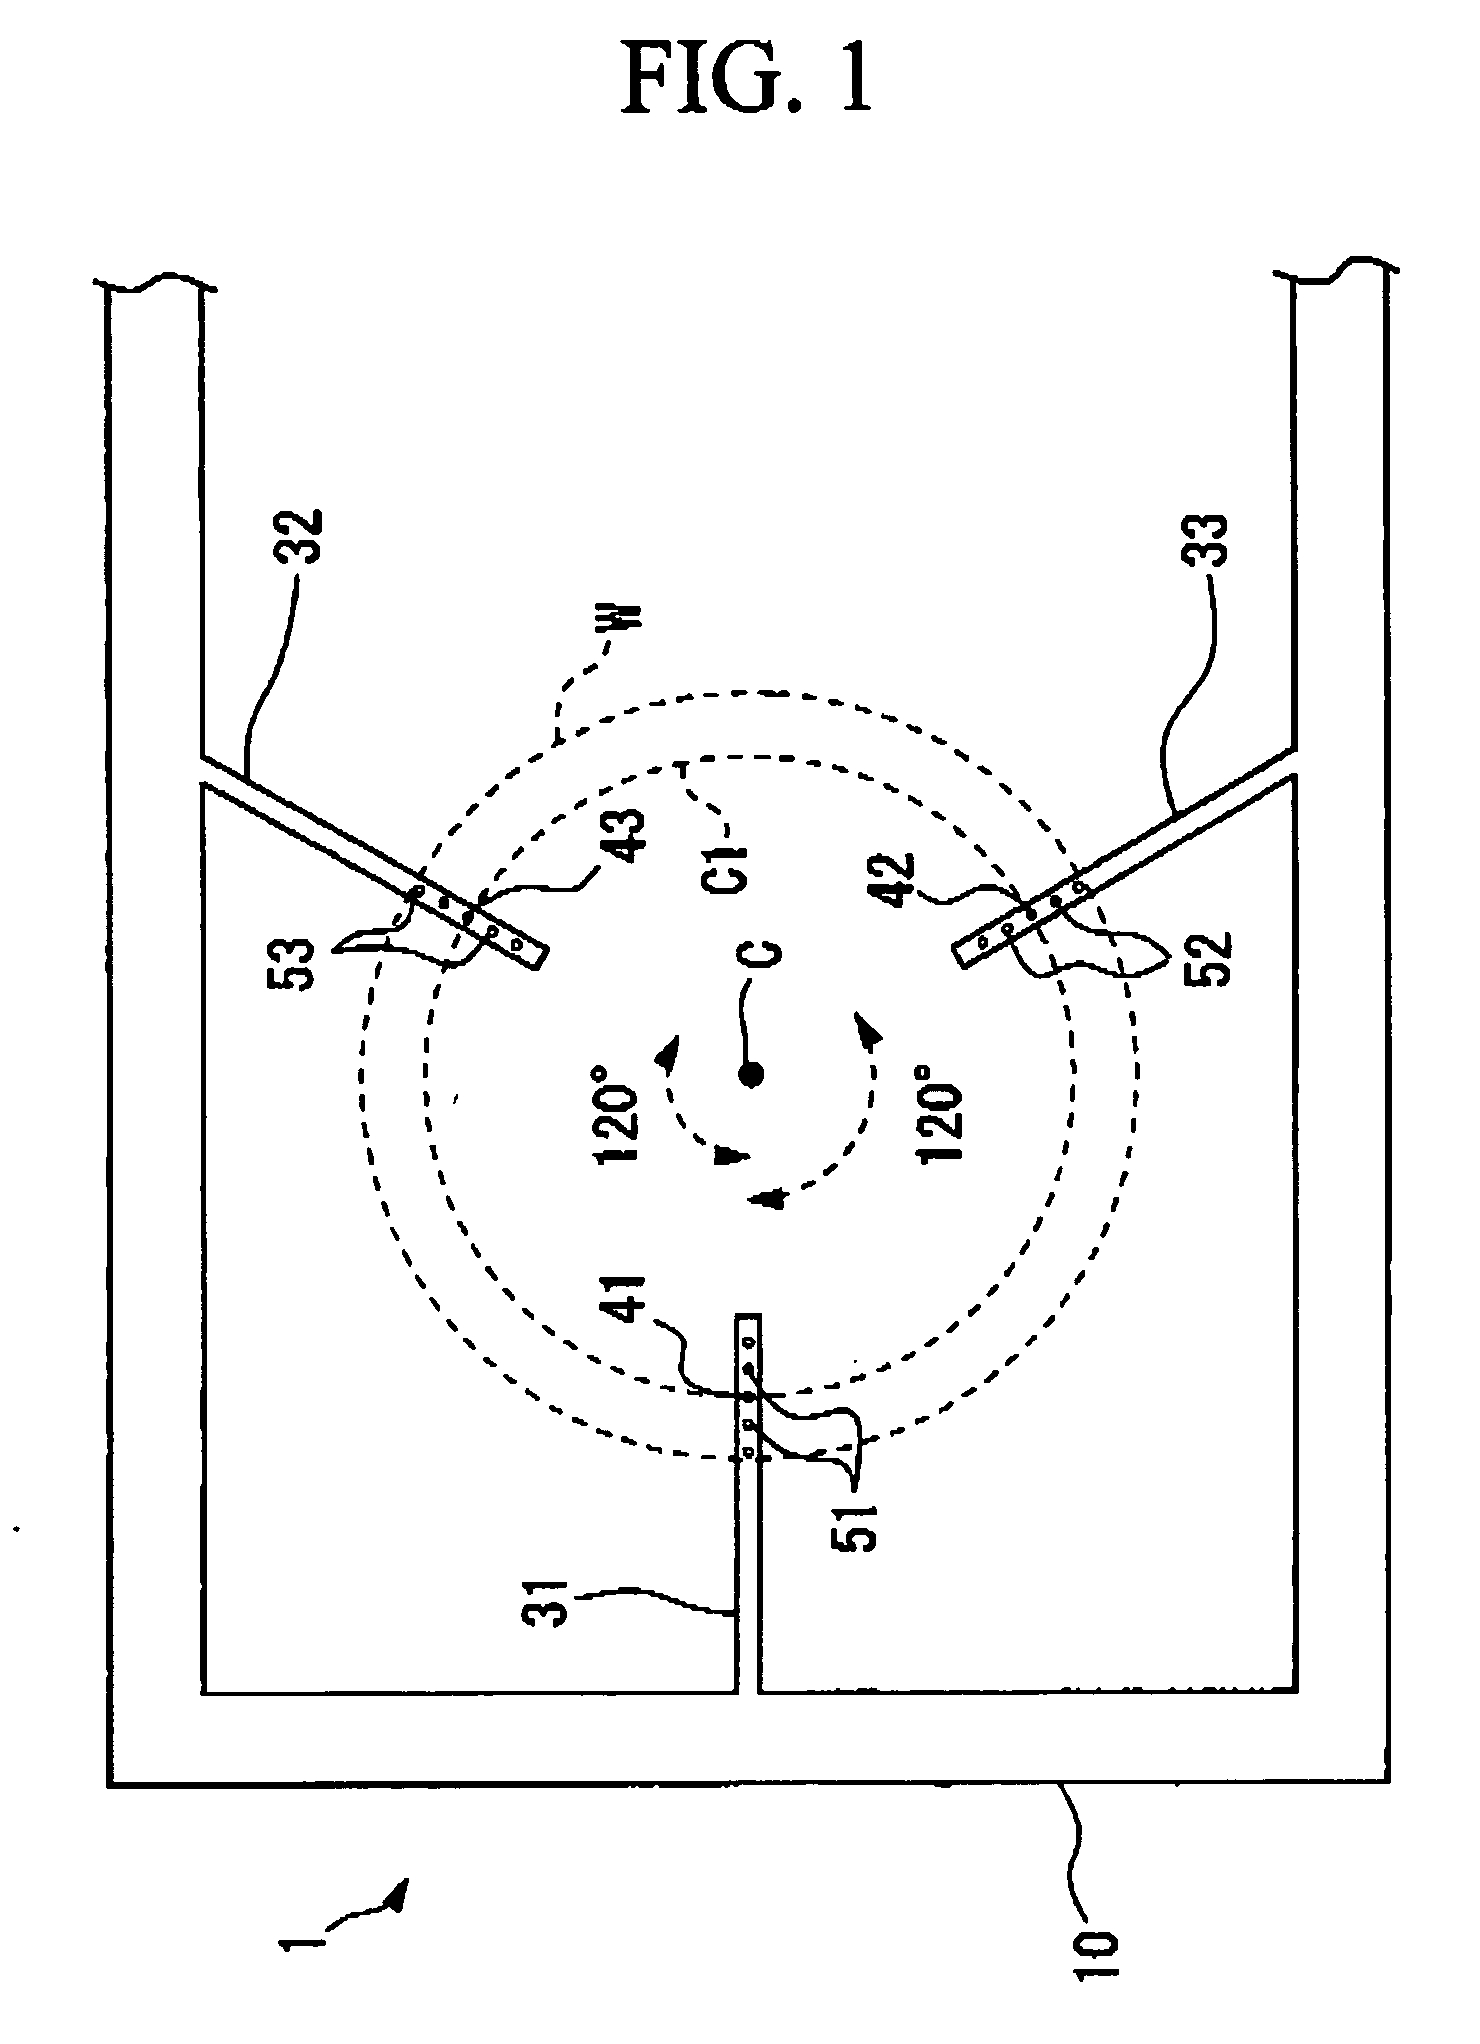 Silicon wafer heat treatment jig, and silicon wafer heat treatment method